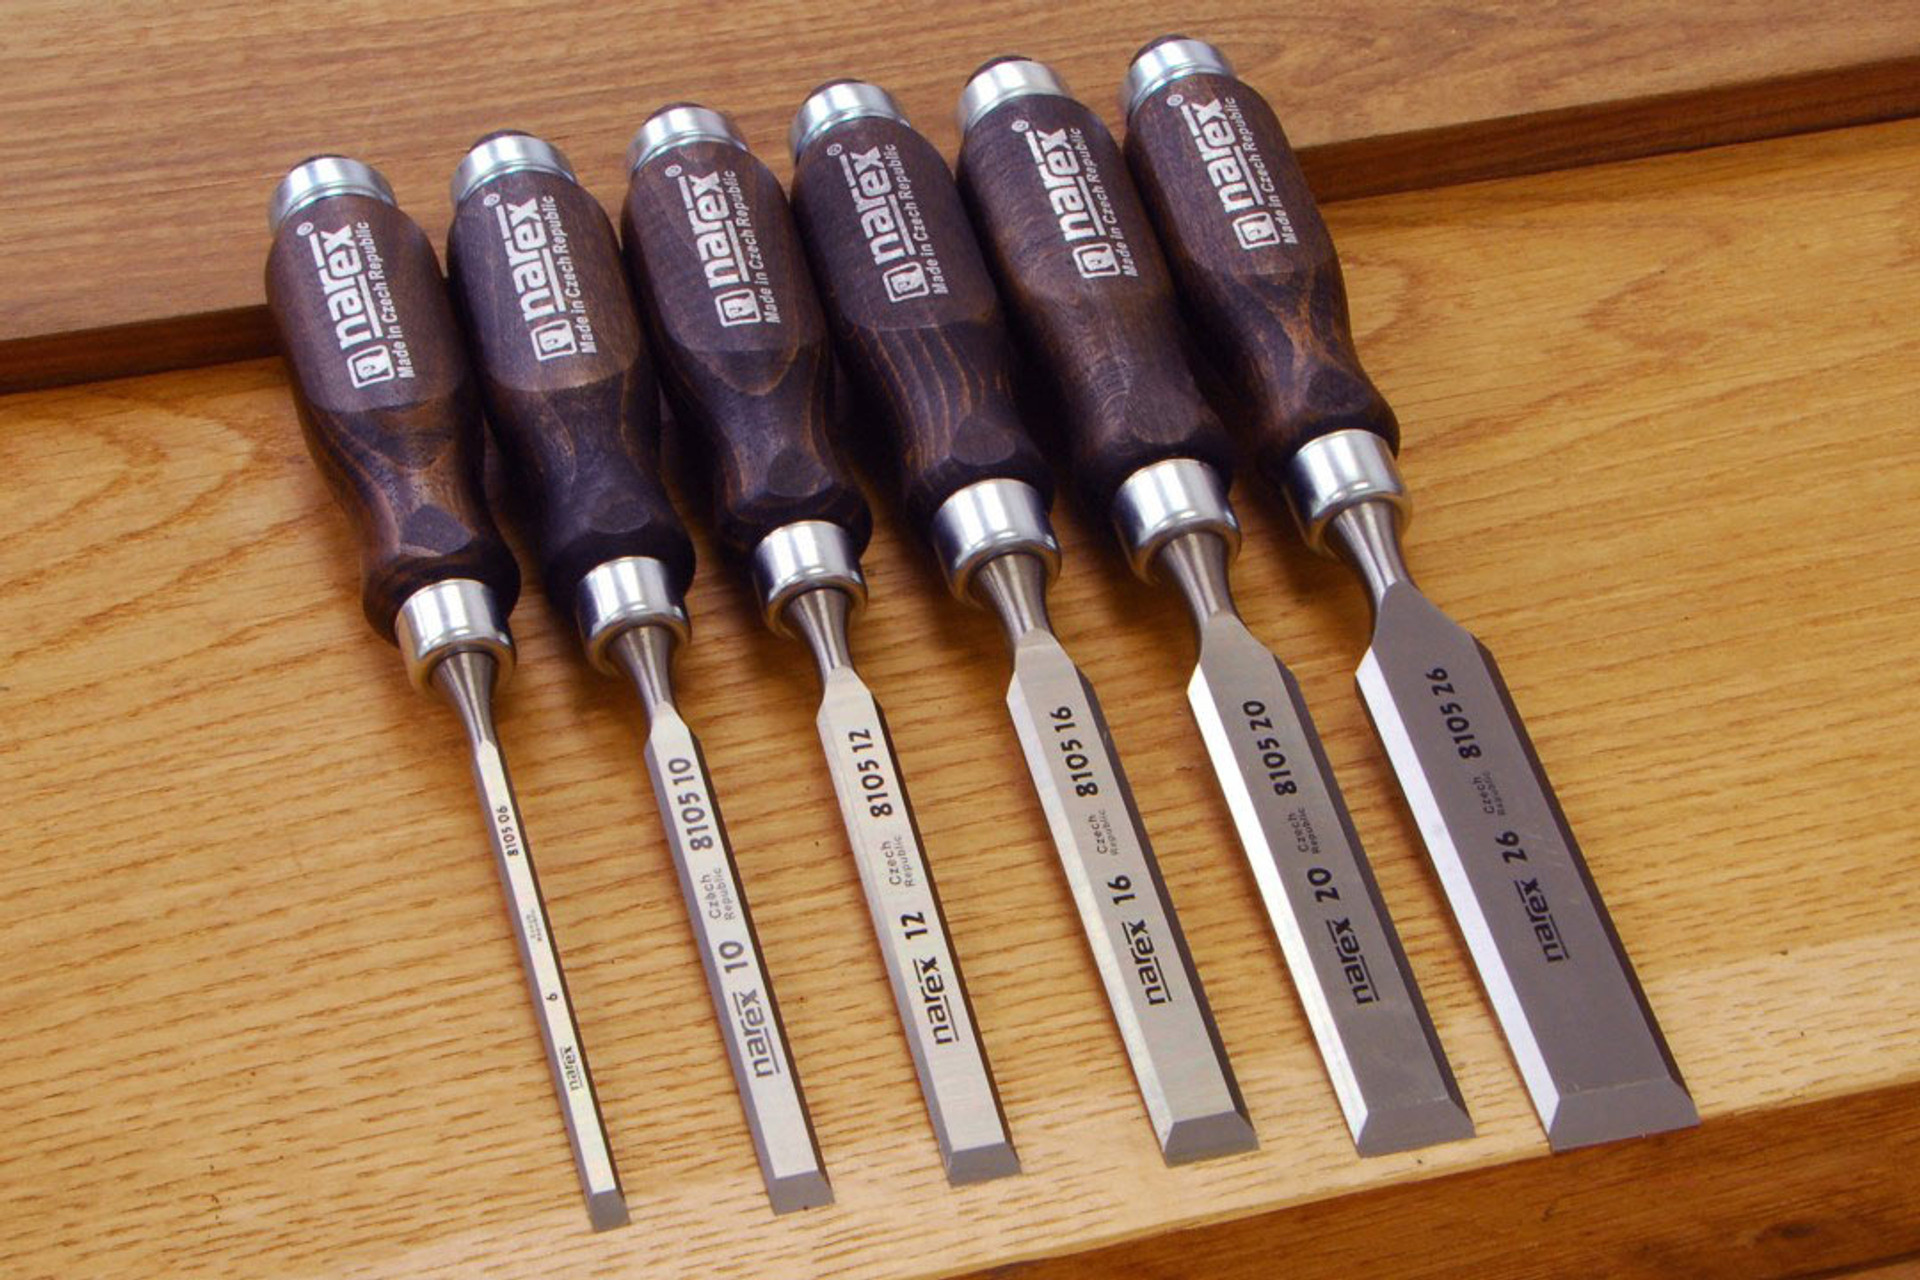 Narex 8105 Bevel Edged Chisel Set of 6 for woodworking